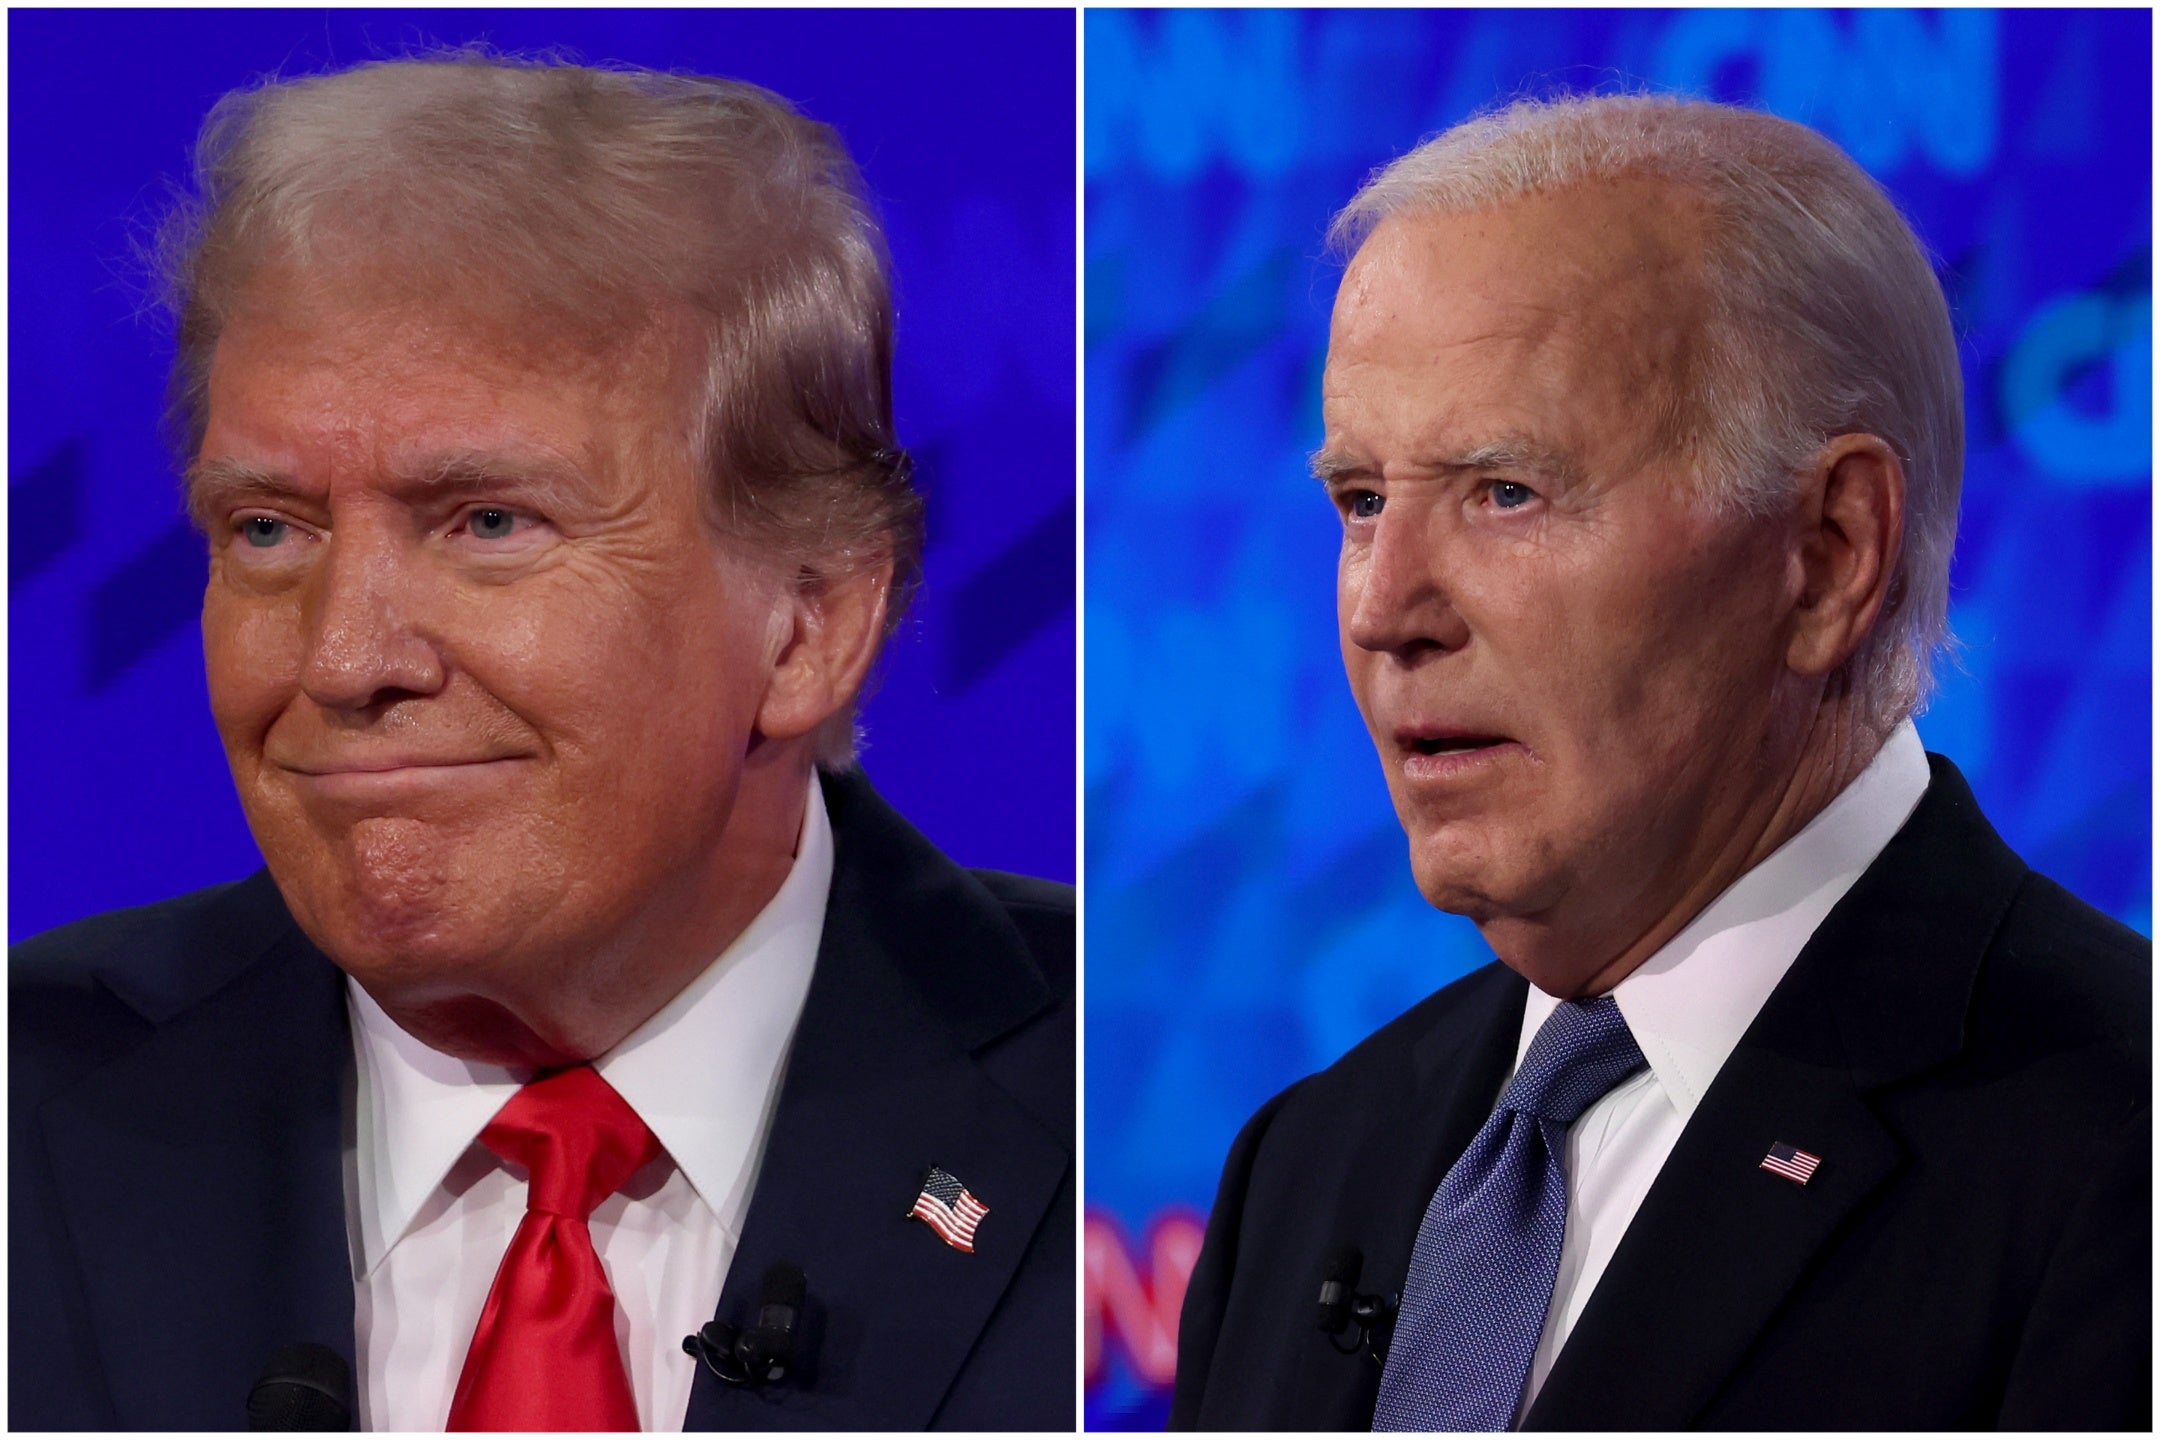 Joe Biden called out Trump’s alleged affair and sexual abuse civil lawsuit brought by writer E Jean Carroll during the presidential debate